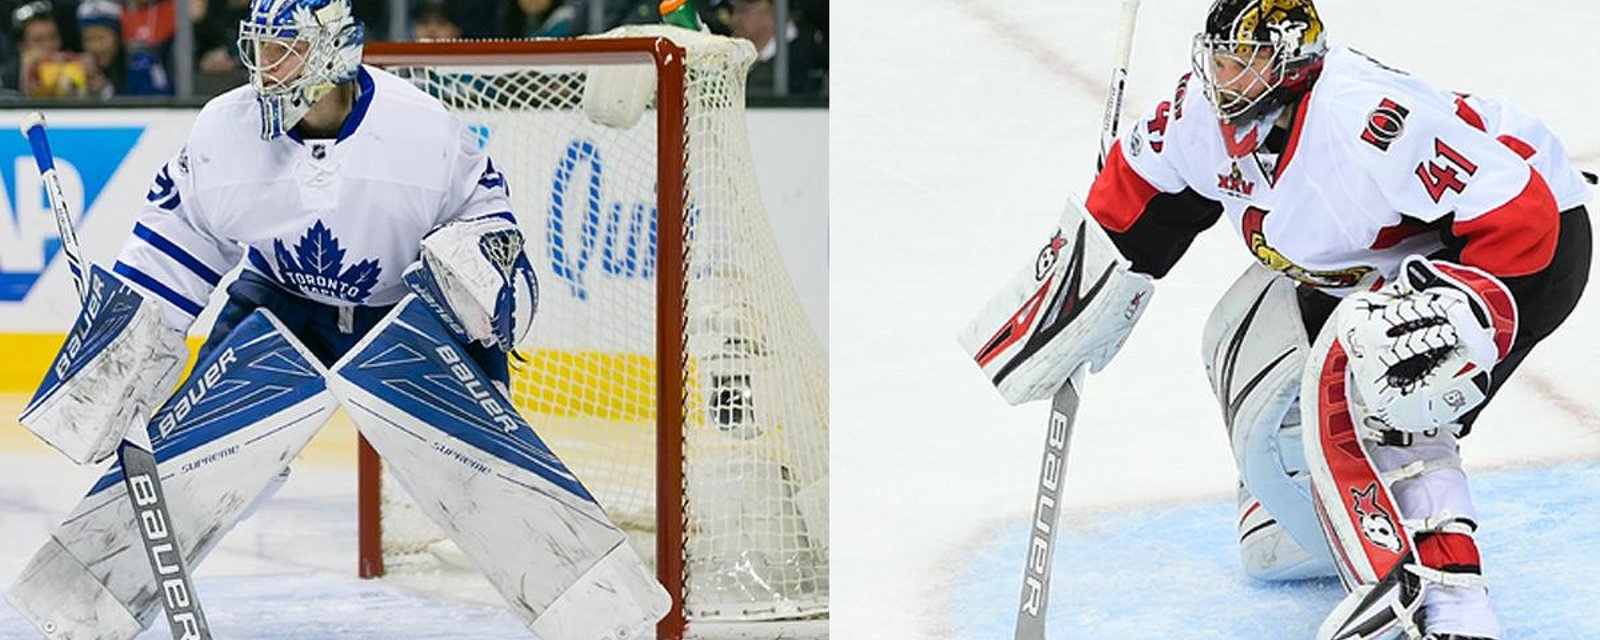 Your call: Who made the better save?